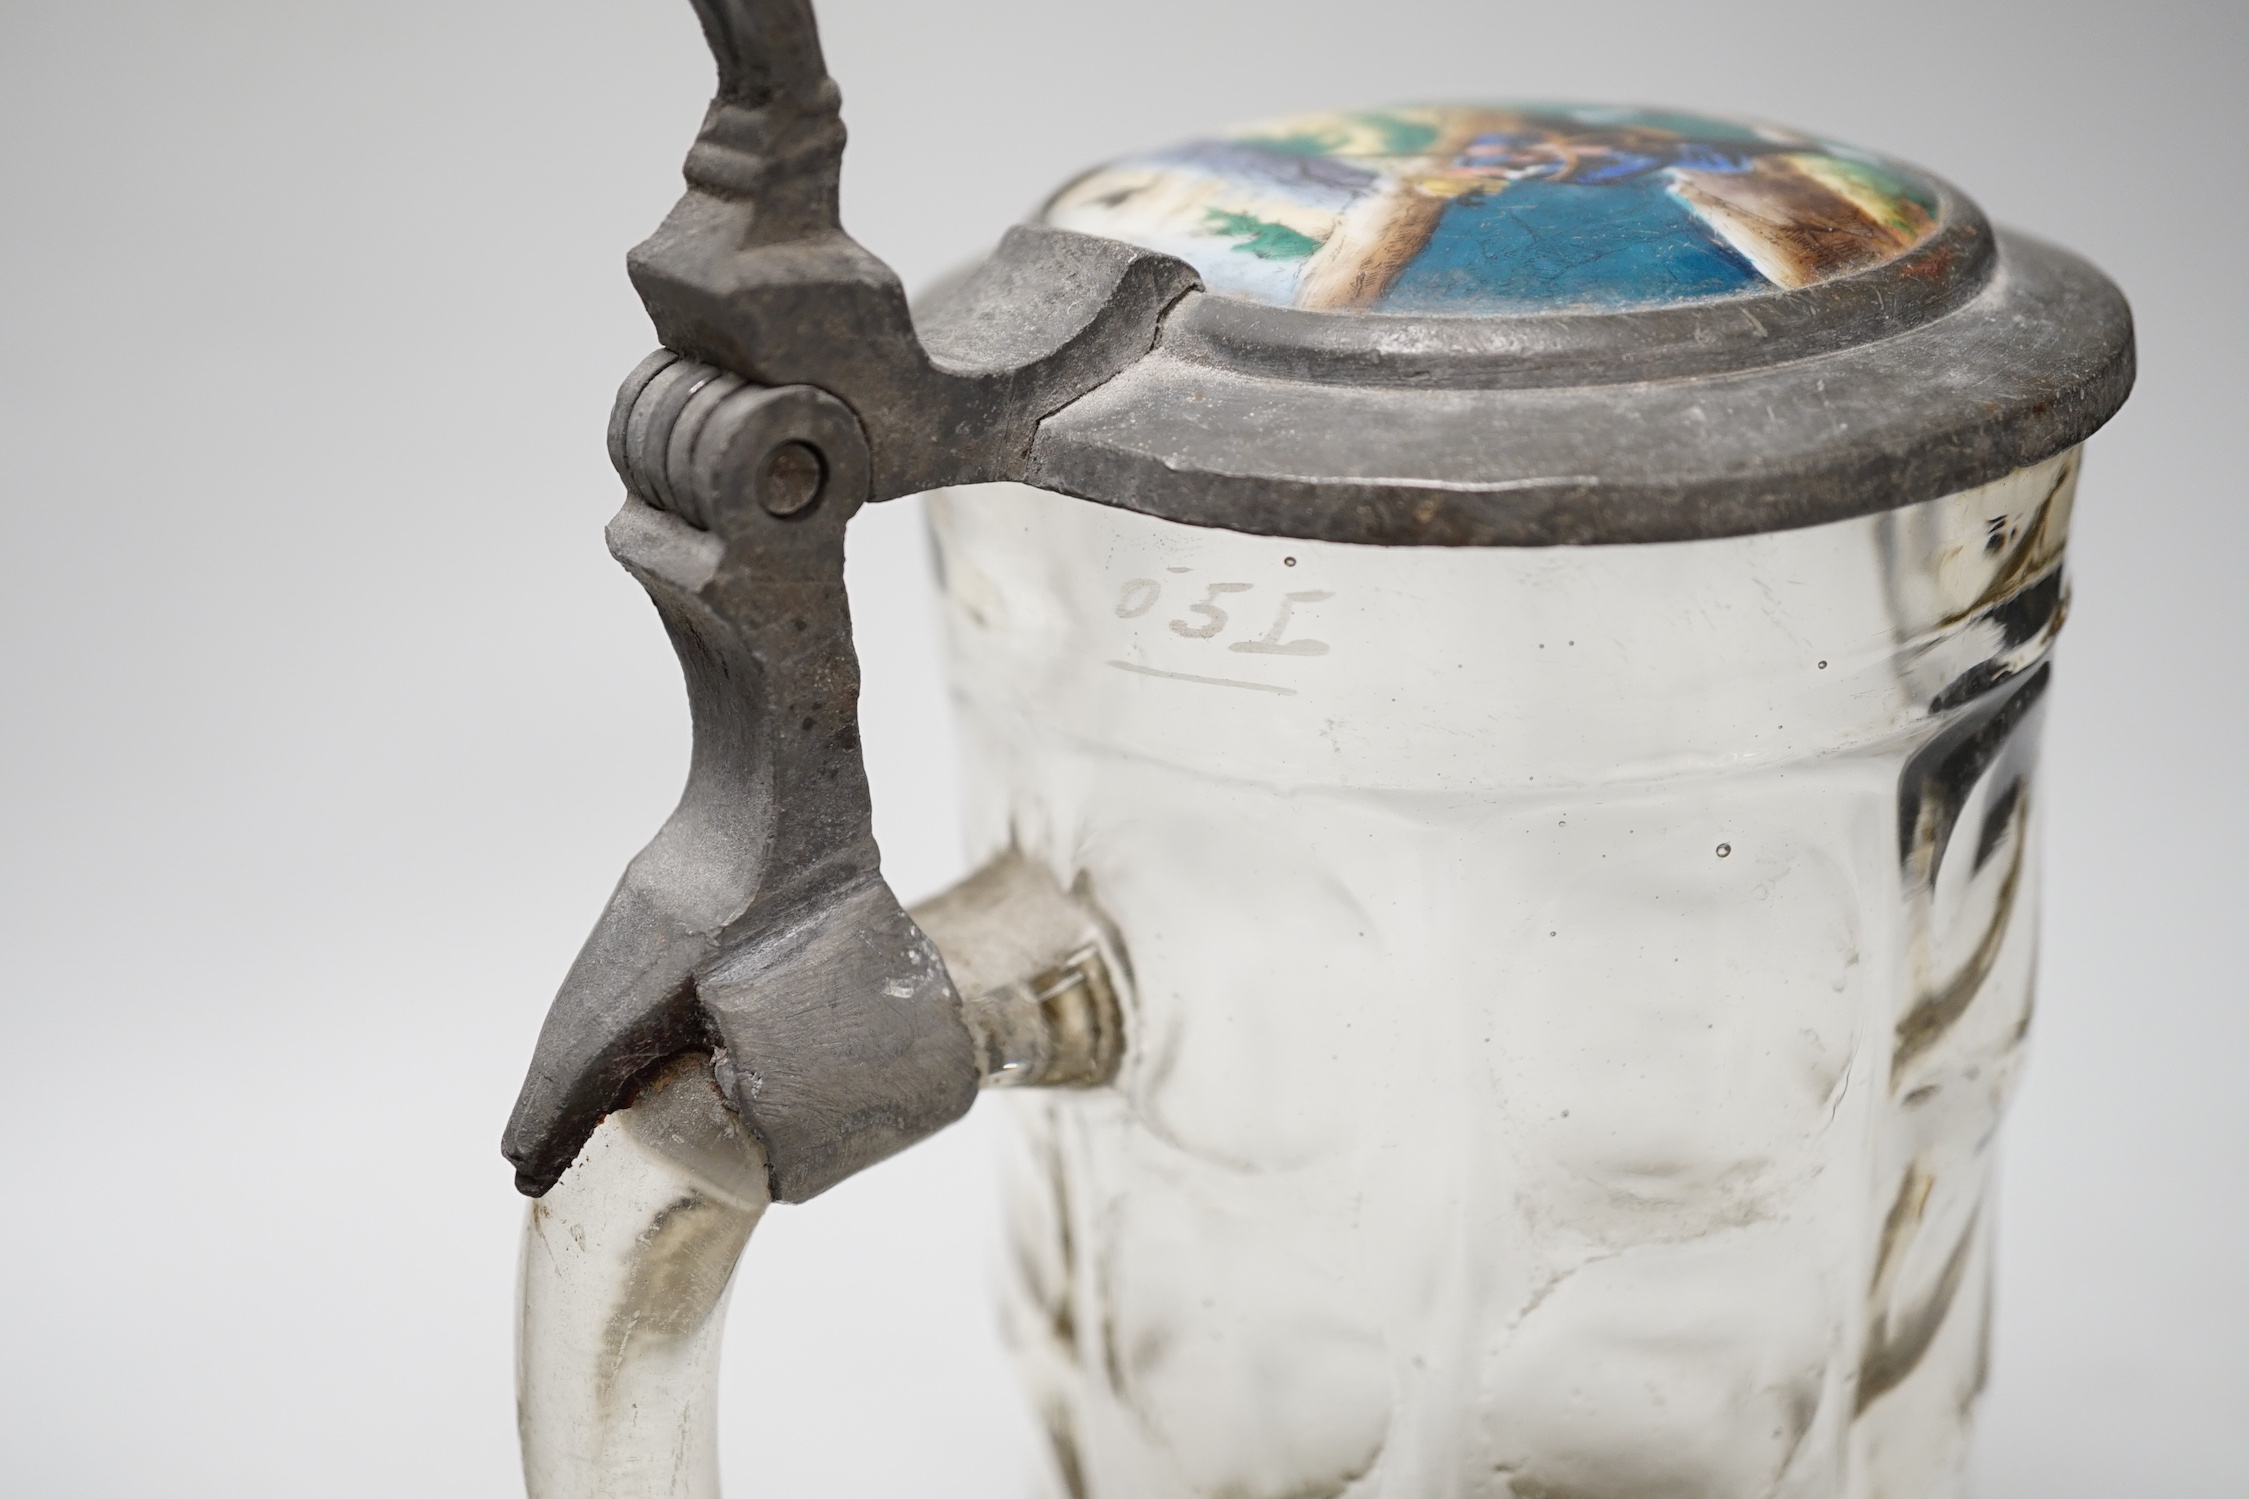 A German faience stein, dated 1819, a glass stein and an inkwell, largest 24cm